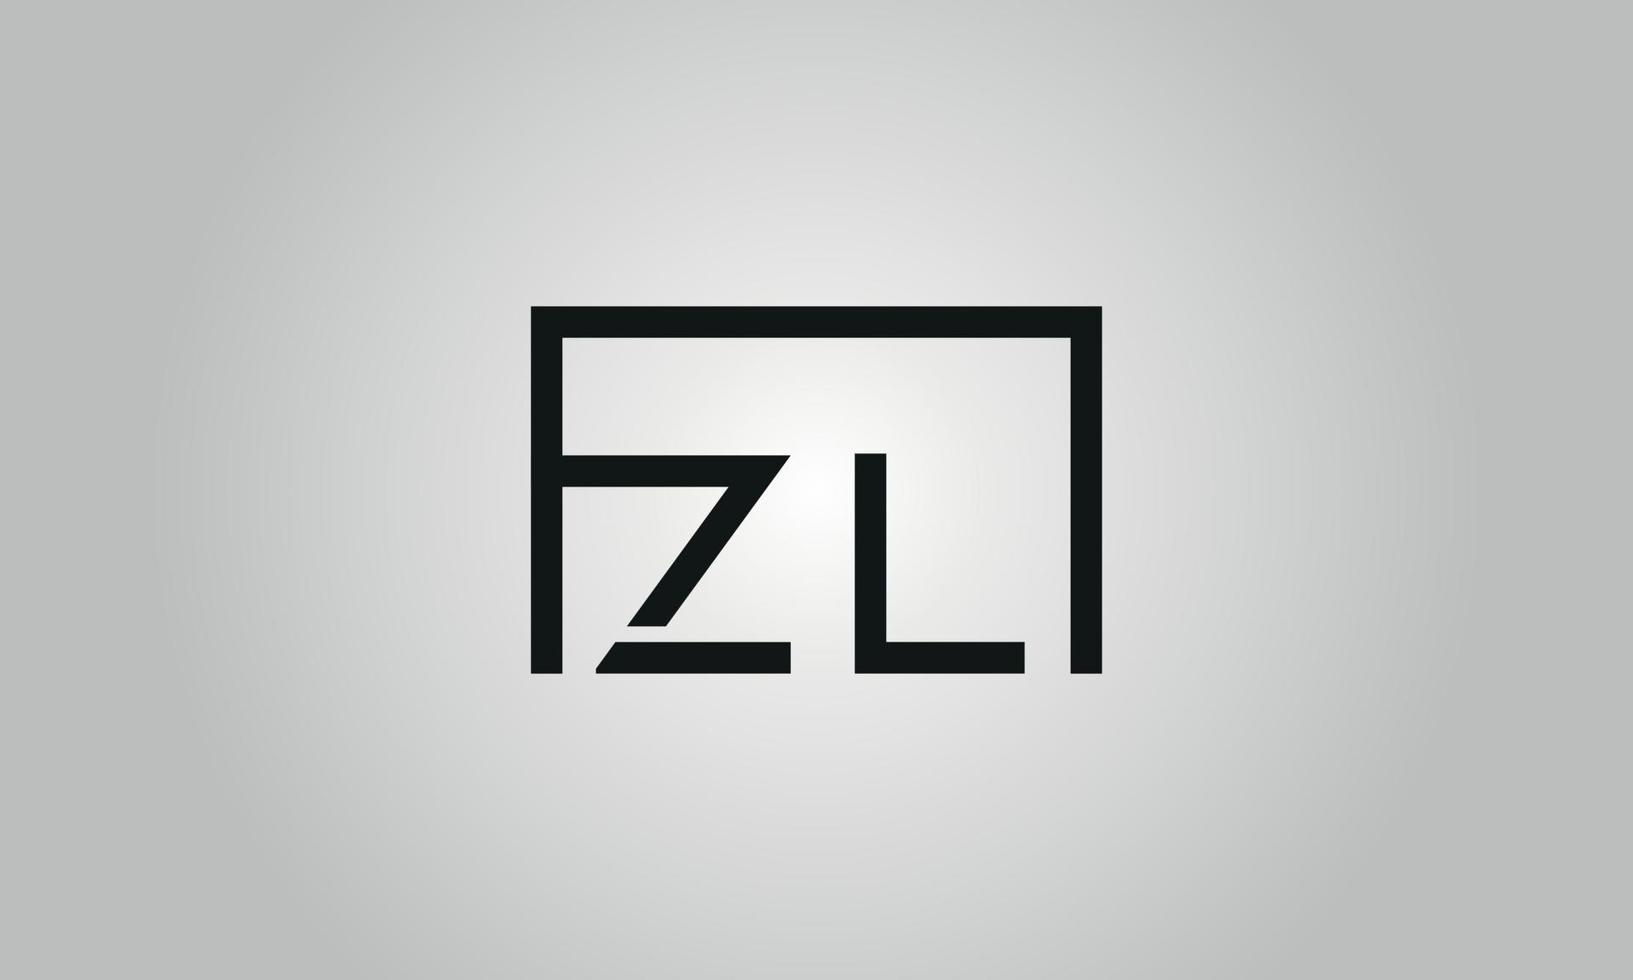 Letter ZL logo design. ZL logo with square shape in black colors vector free vector template.